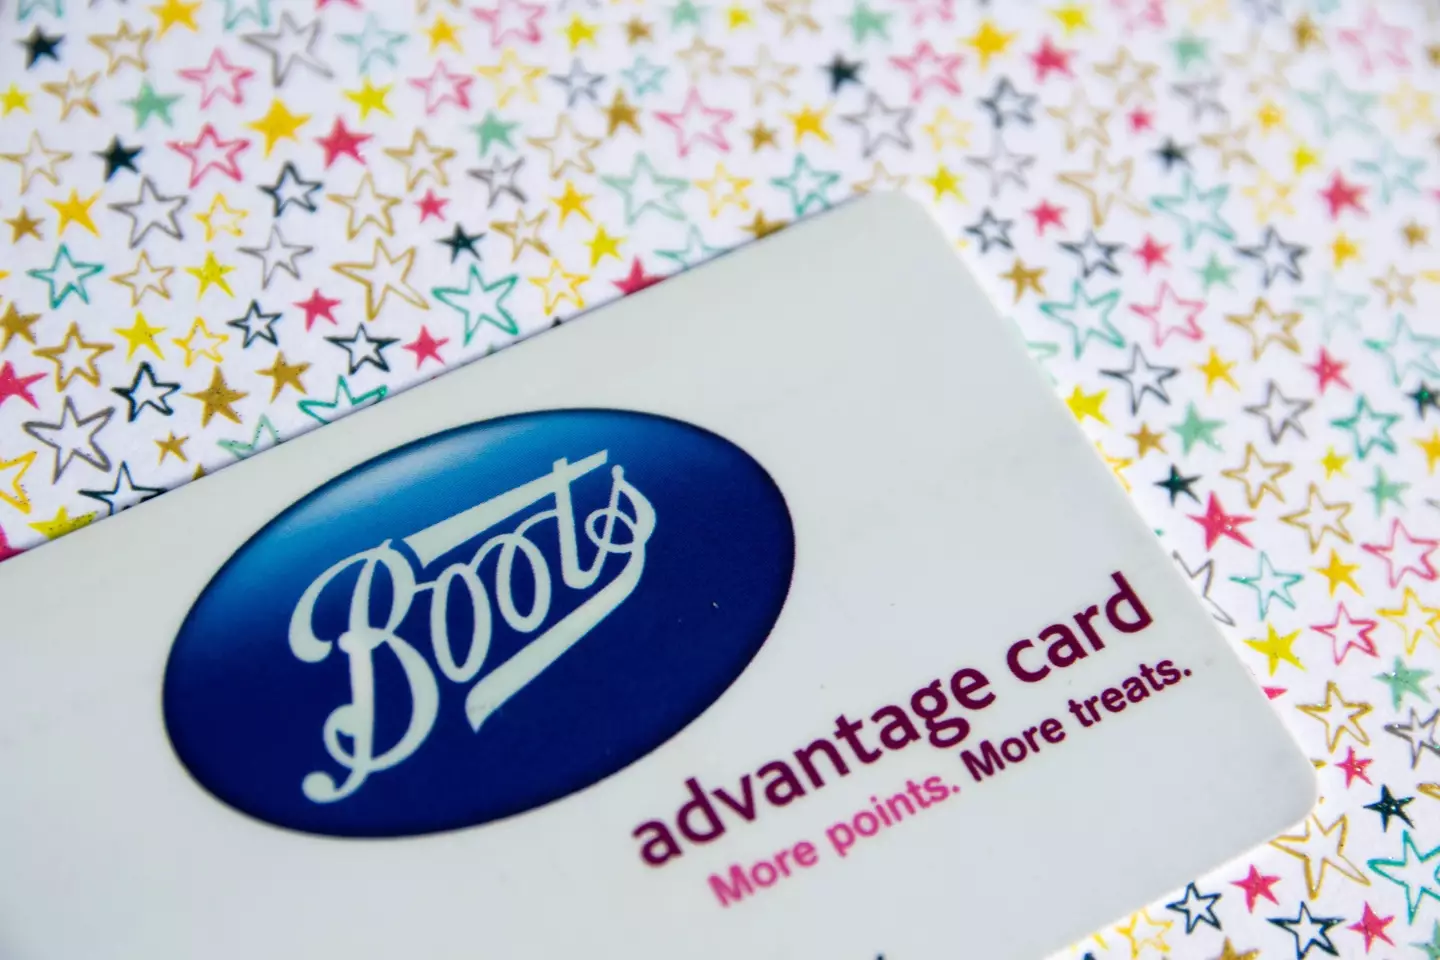 The Boots Advantage Card offers an incredible range of discounts.